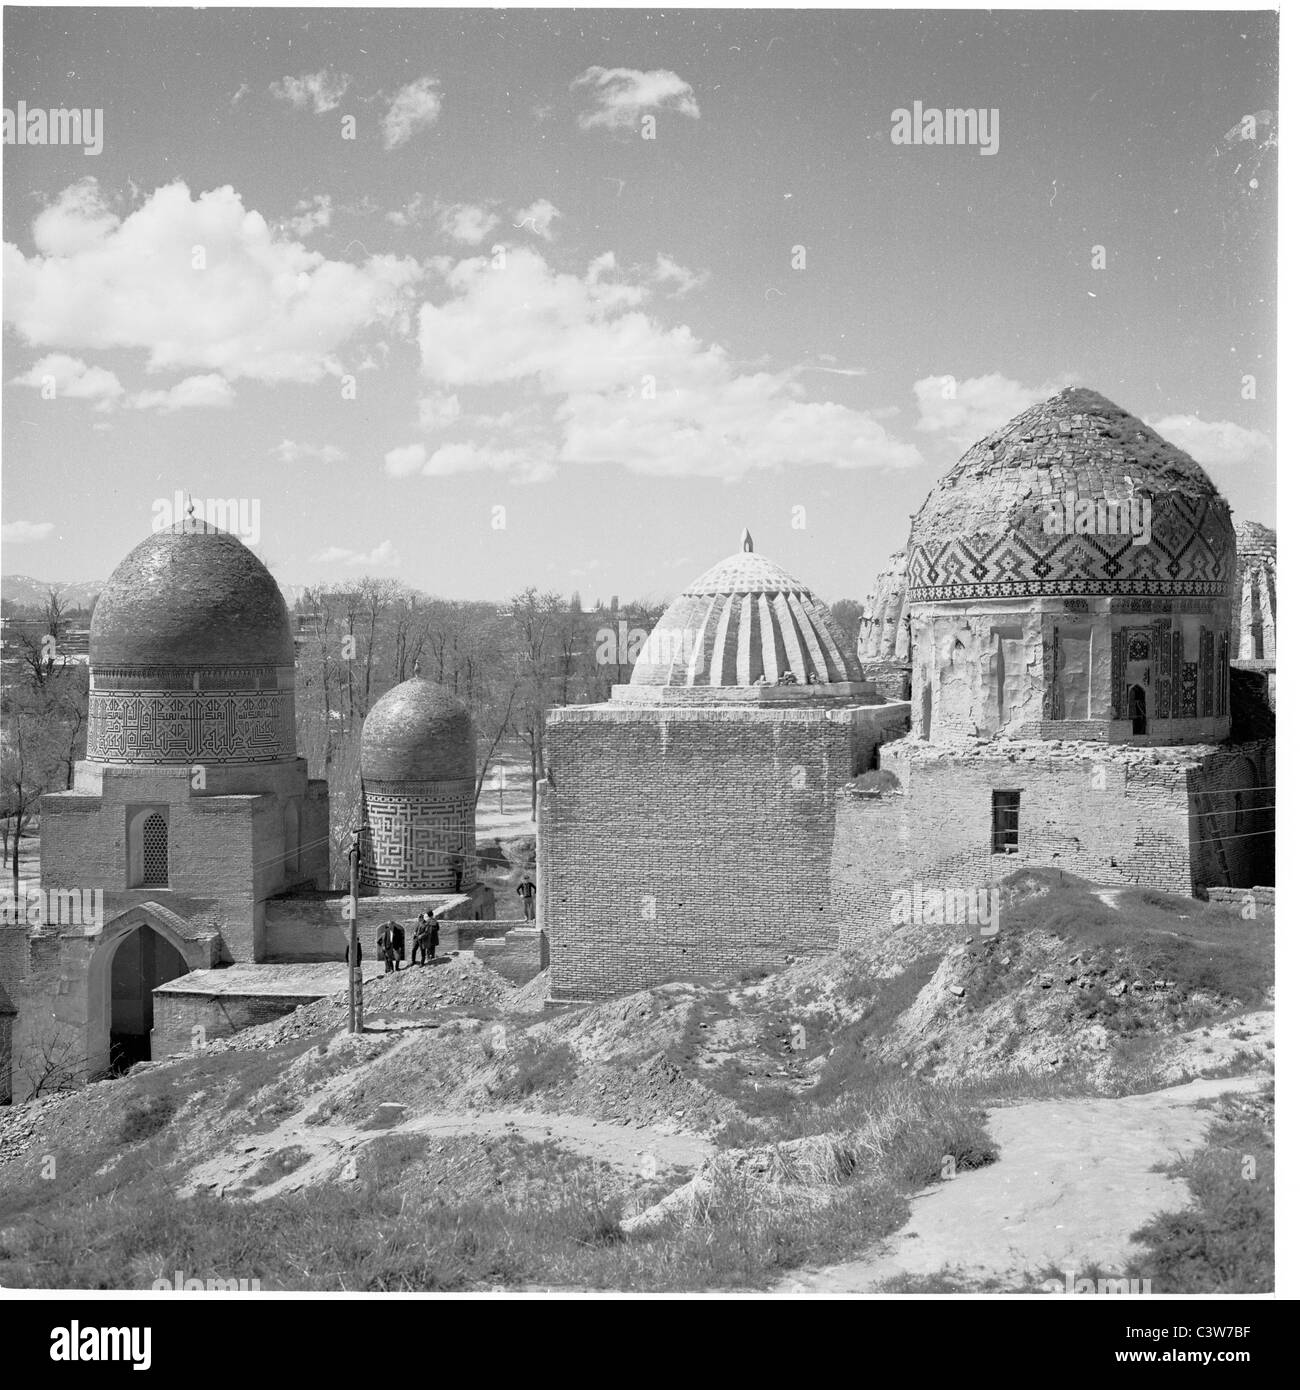 1950s. Historical picture by J Allan Cash of the Shahi-Zinda Mausoleums, Samarkand, Uzbekistan, the Tomb of the Living King. Stock Photo